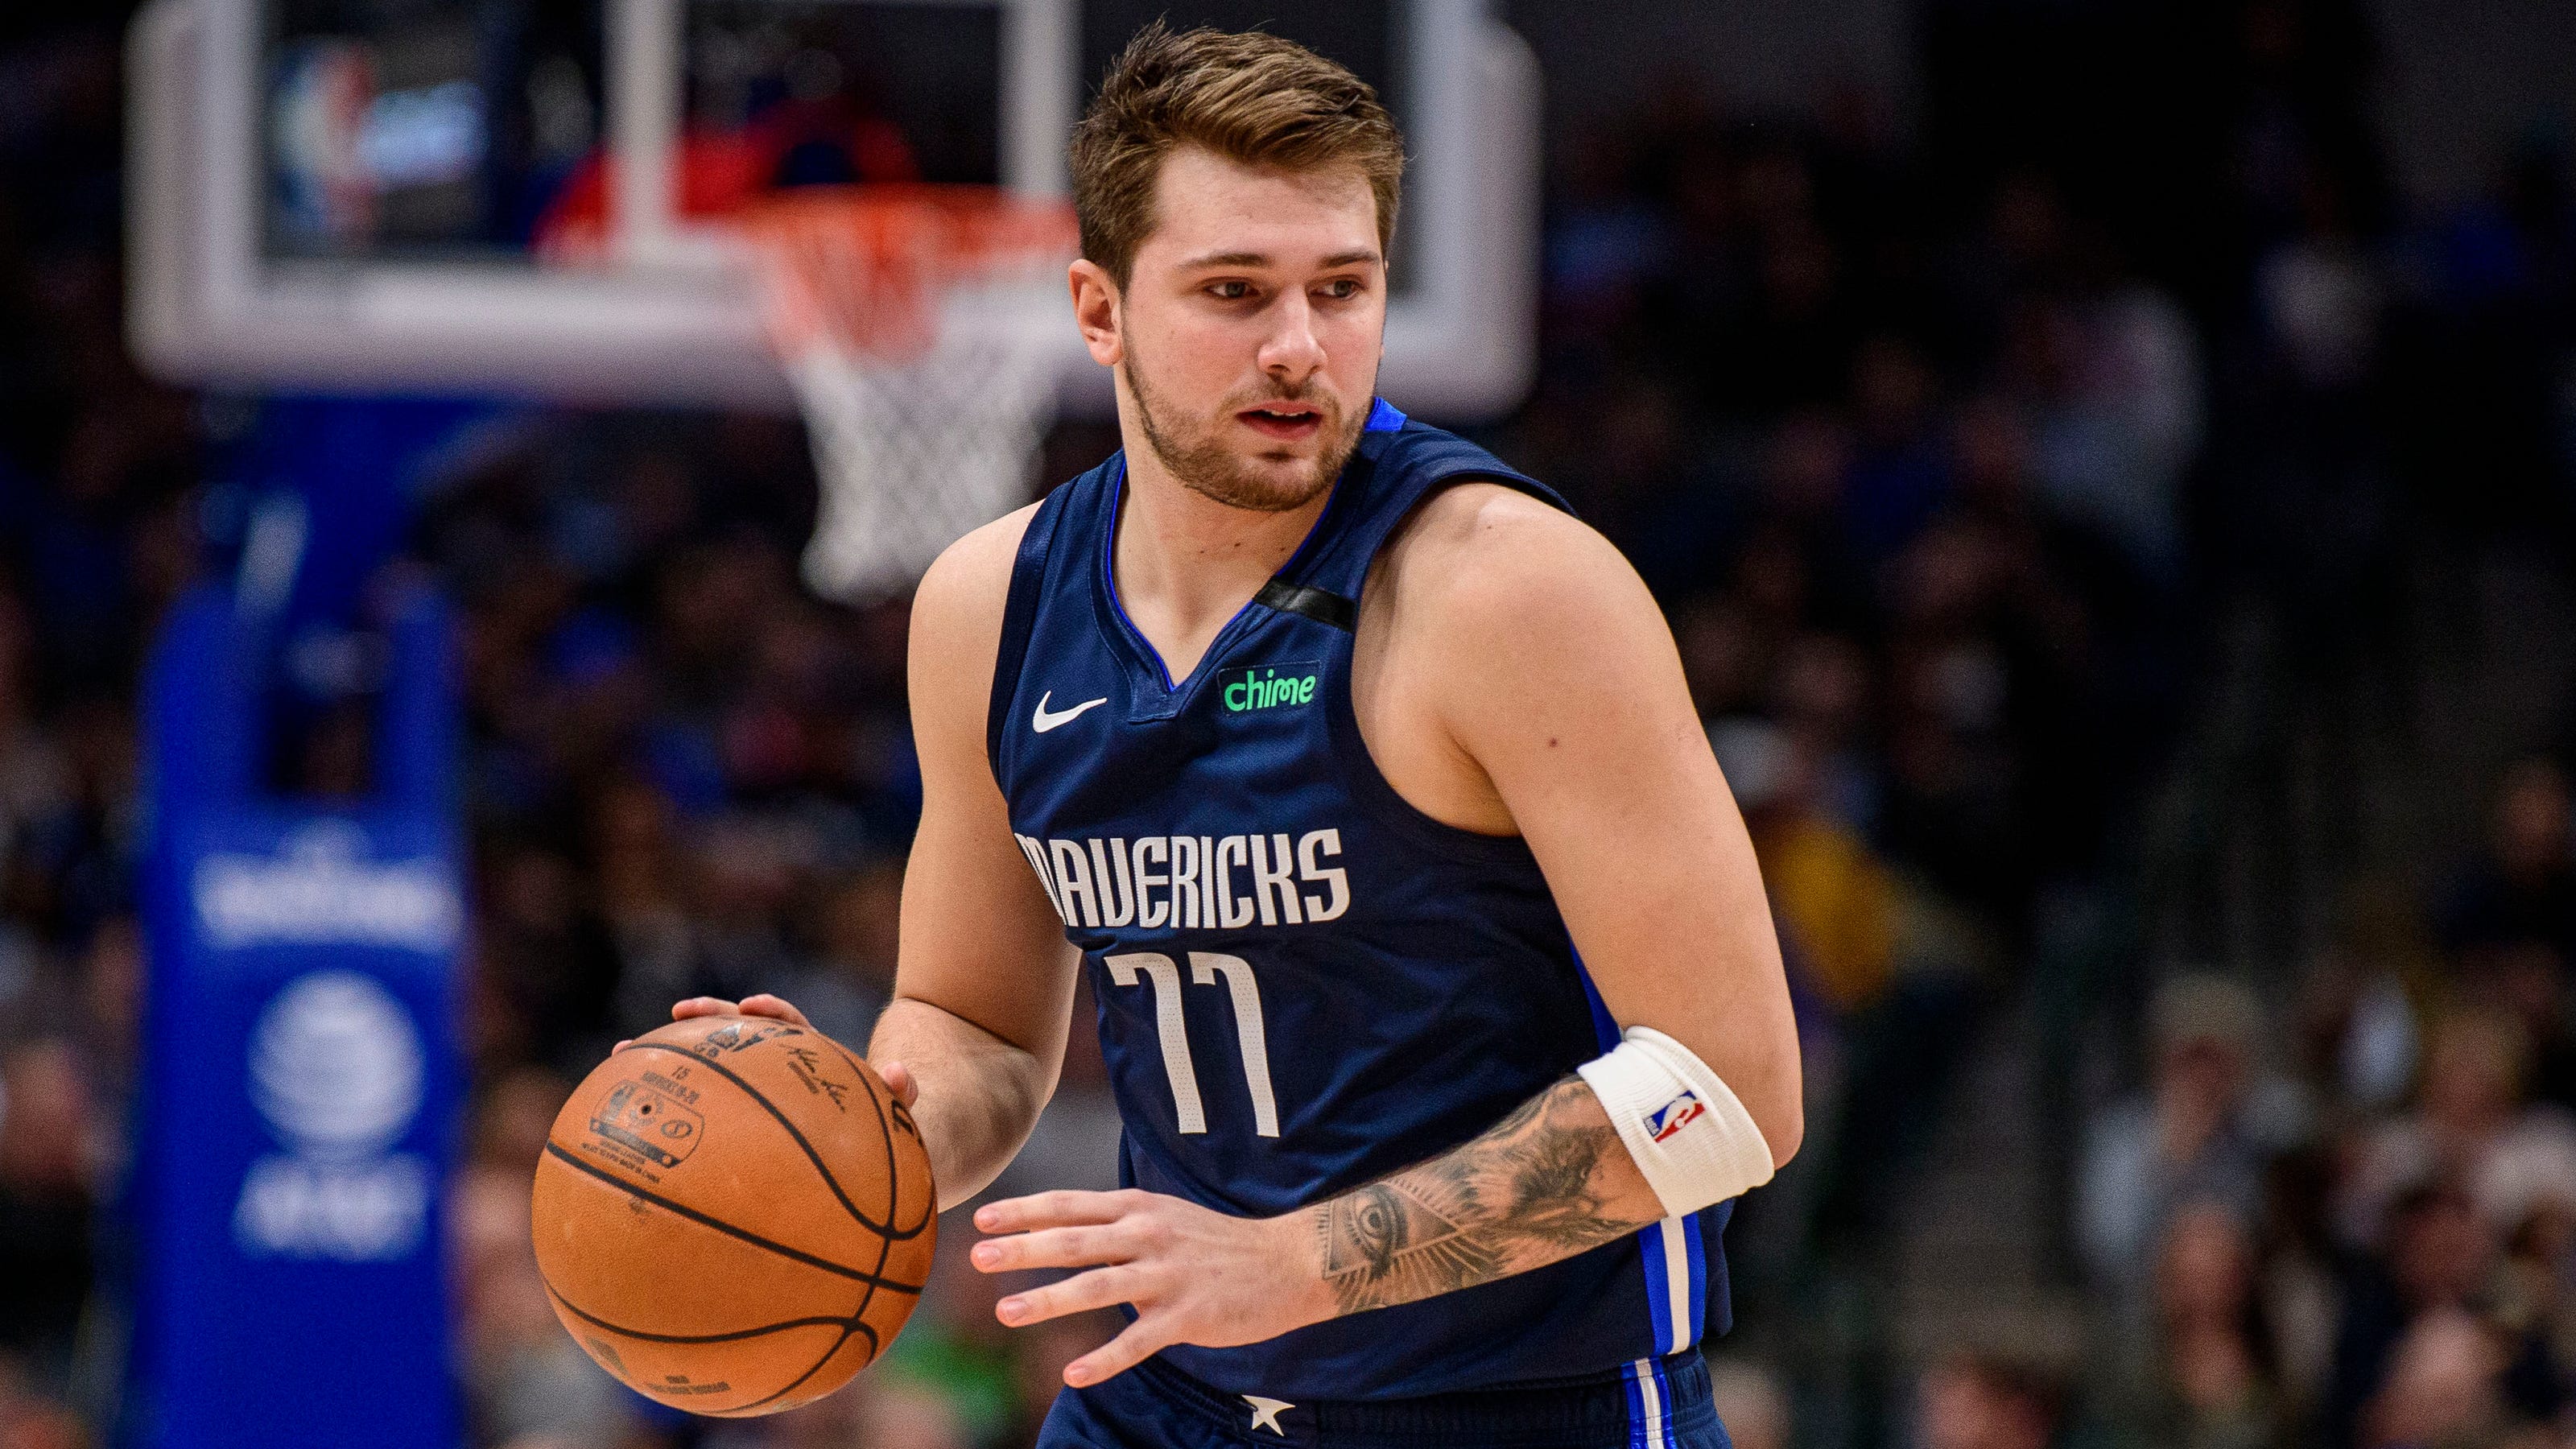 Luka Doncic may be even better for Dallas Mavericks in 2020-21 season